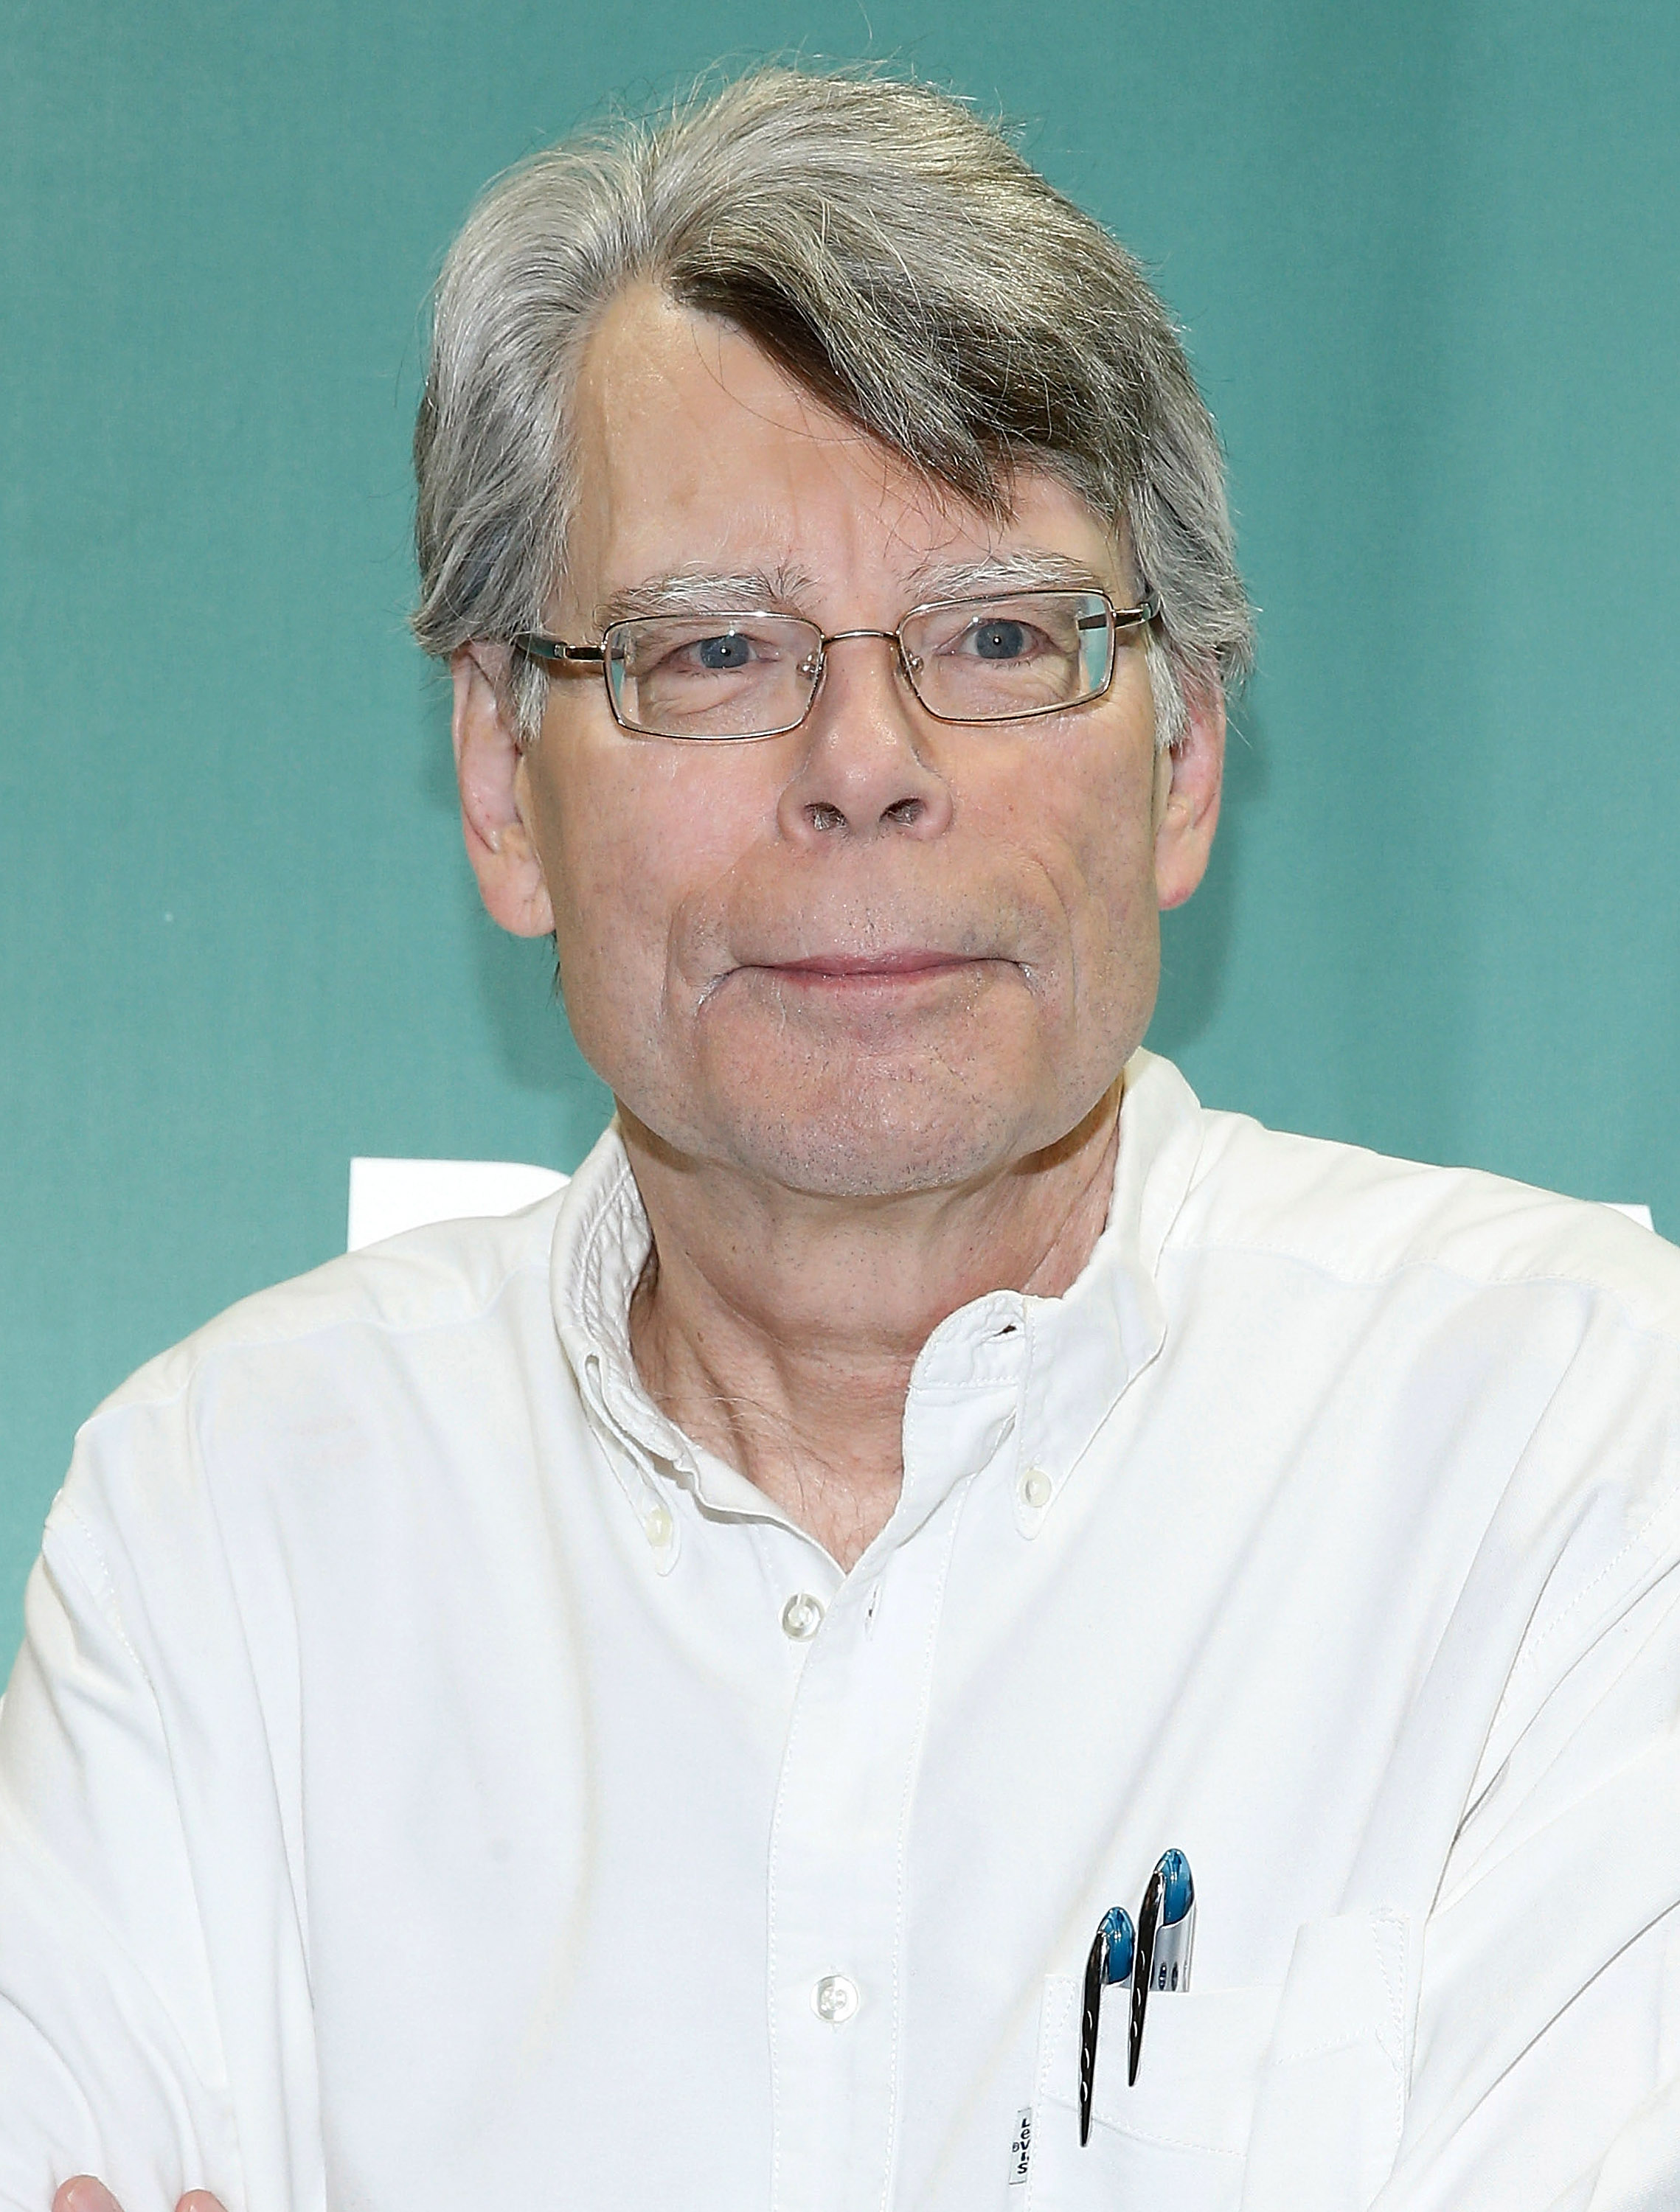 Stephen King signs copies of his book "Revival" in New York City on Nov. 11, 2014.